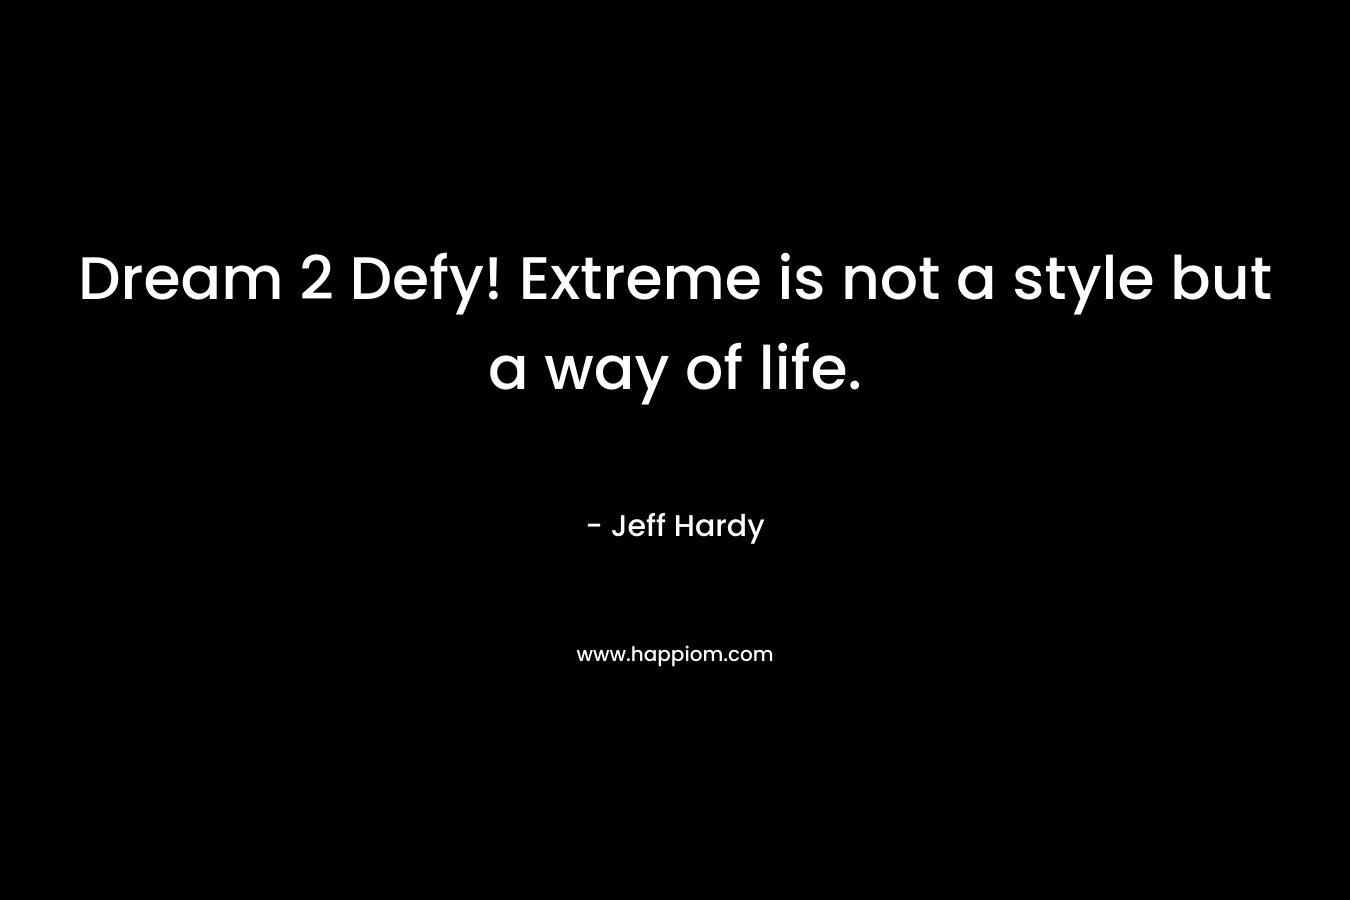 Dream 2 Defy! Extreme is not a style but a way of life. – Jeff Hardy